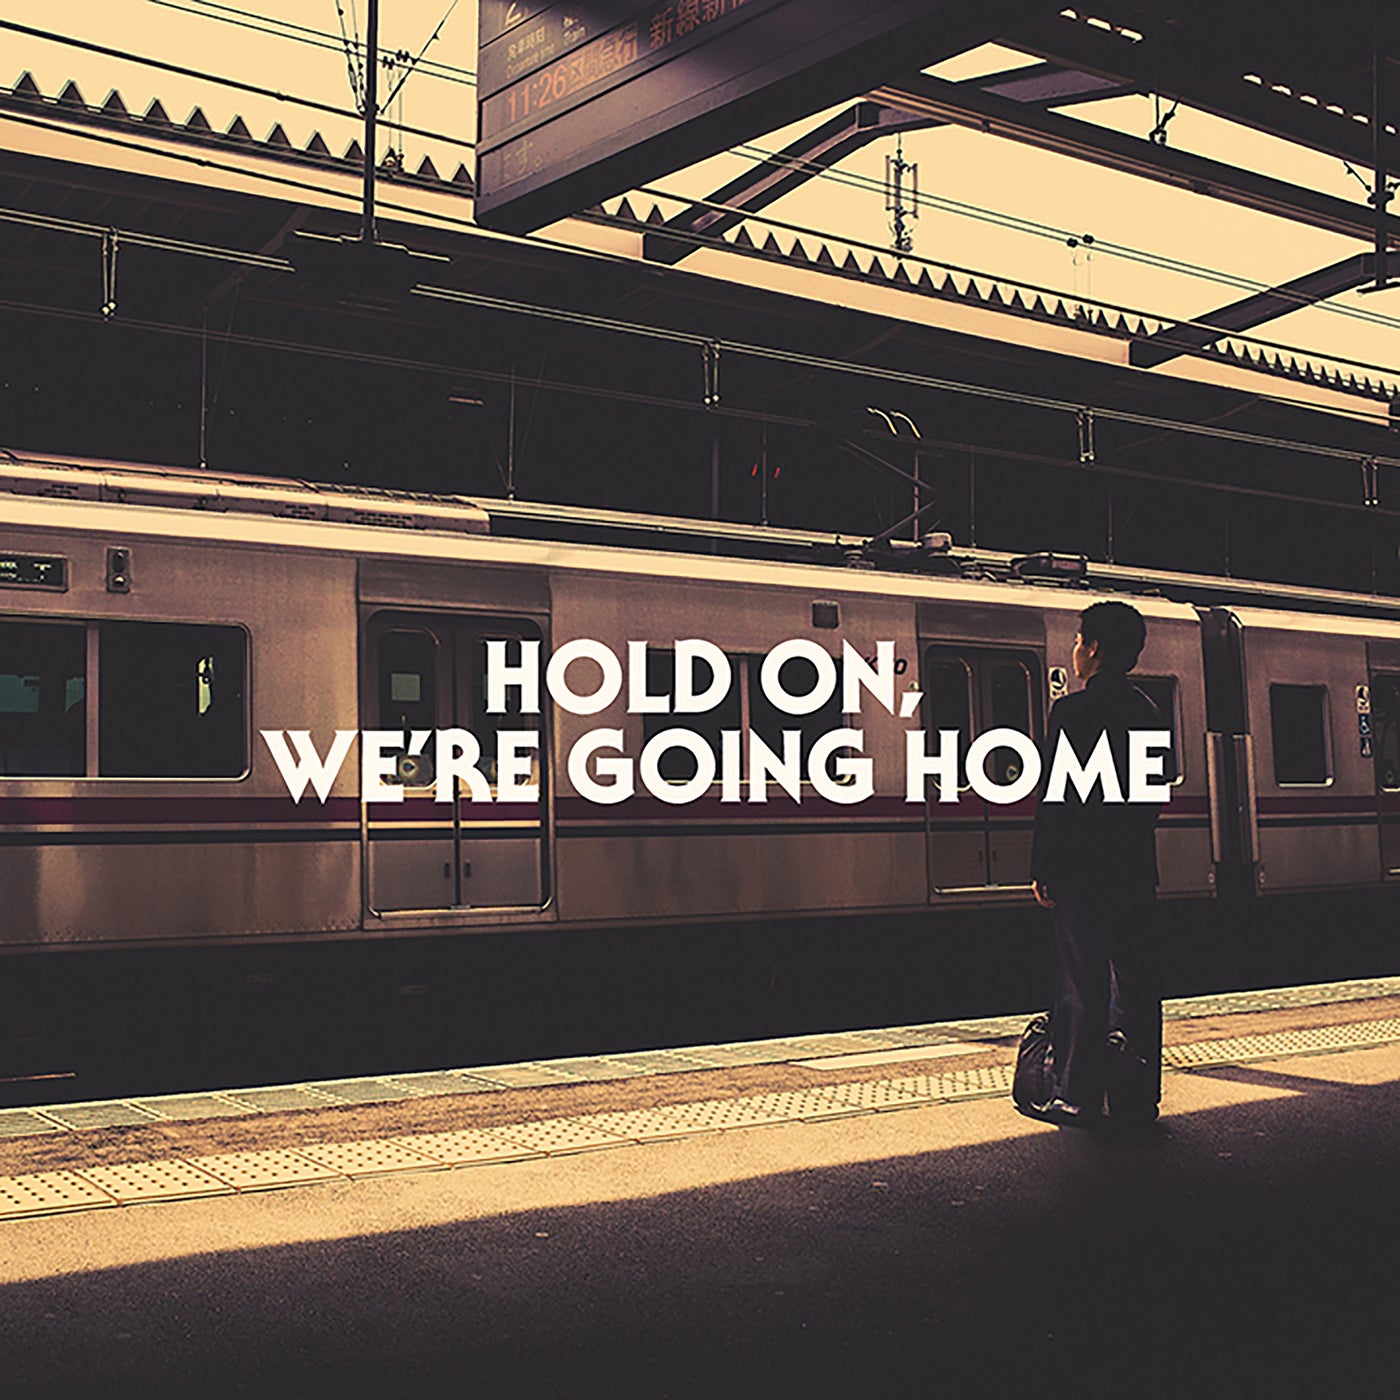 Text going home. Go Home. Going Home. Hold on we’re going Home. Go Home картинка.